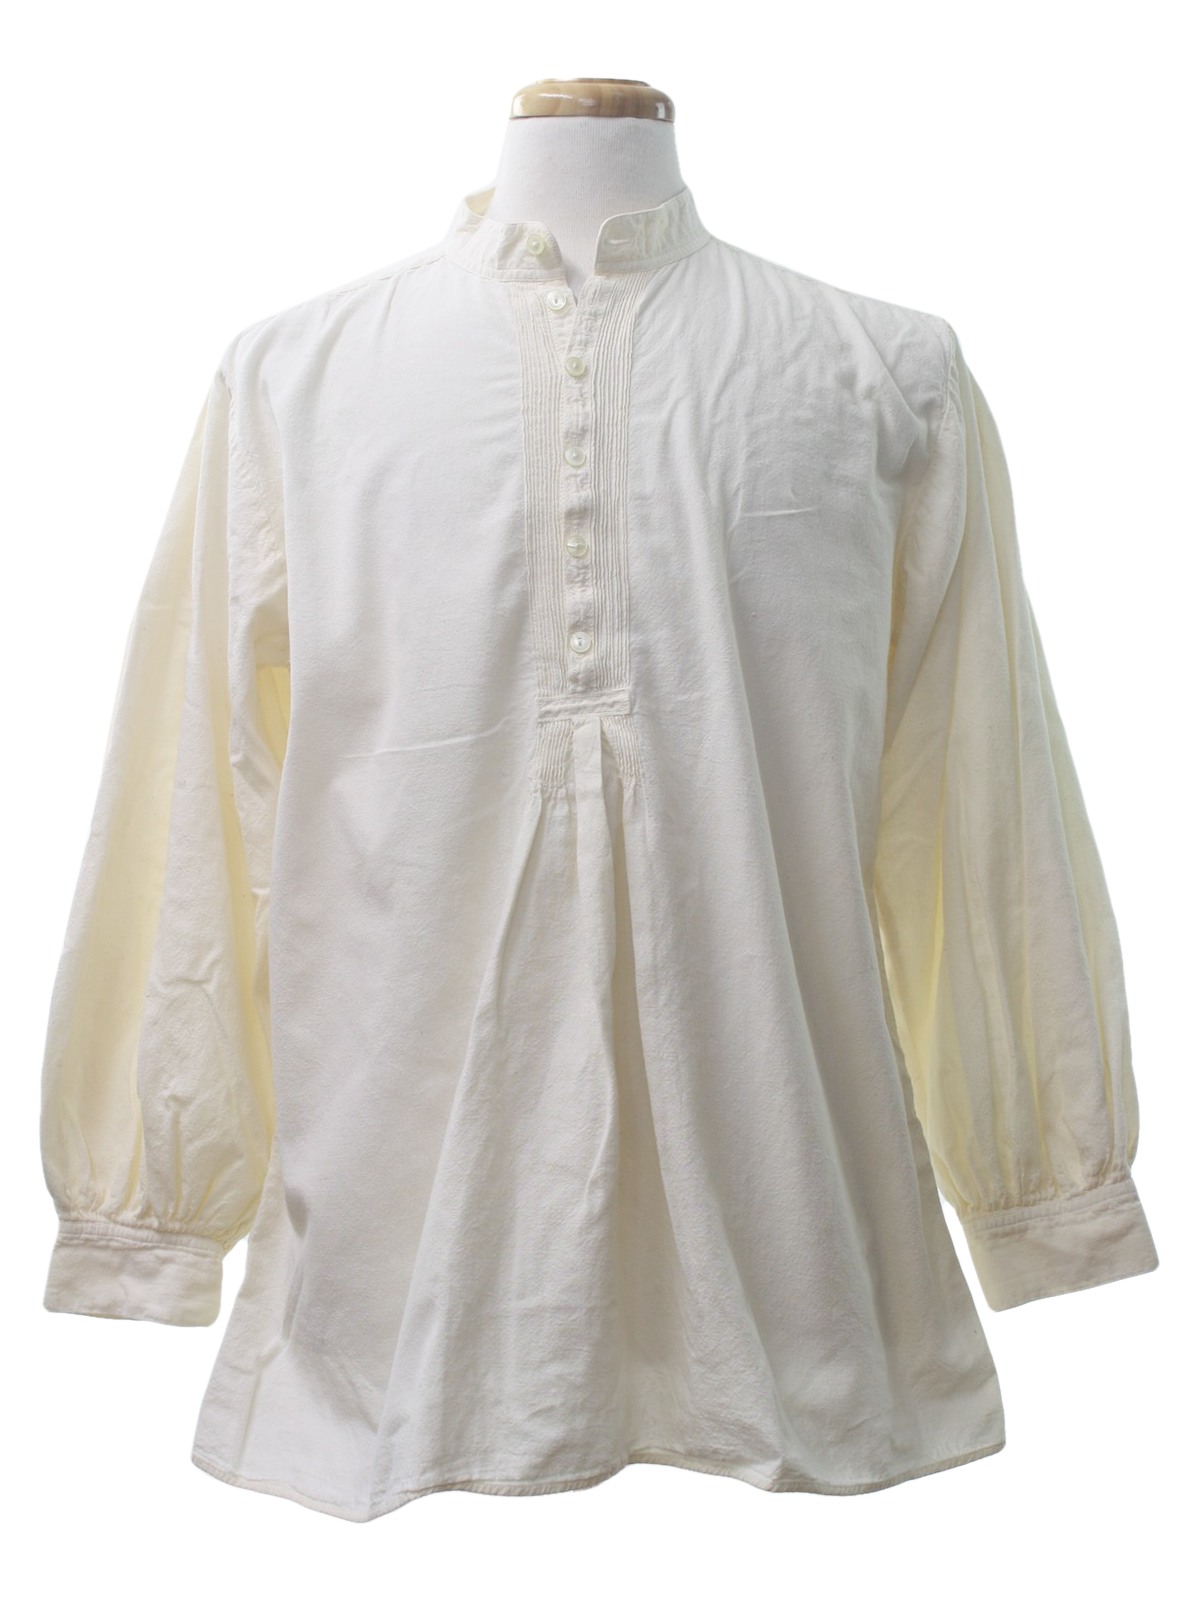 Vintage 1990's Hippie Shirt: 90s -Rumba- Mens off white background ...